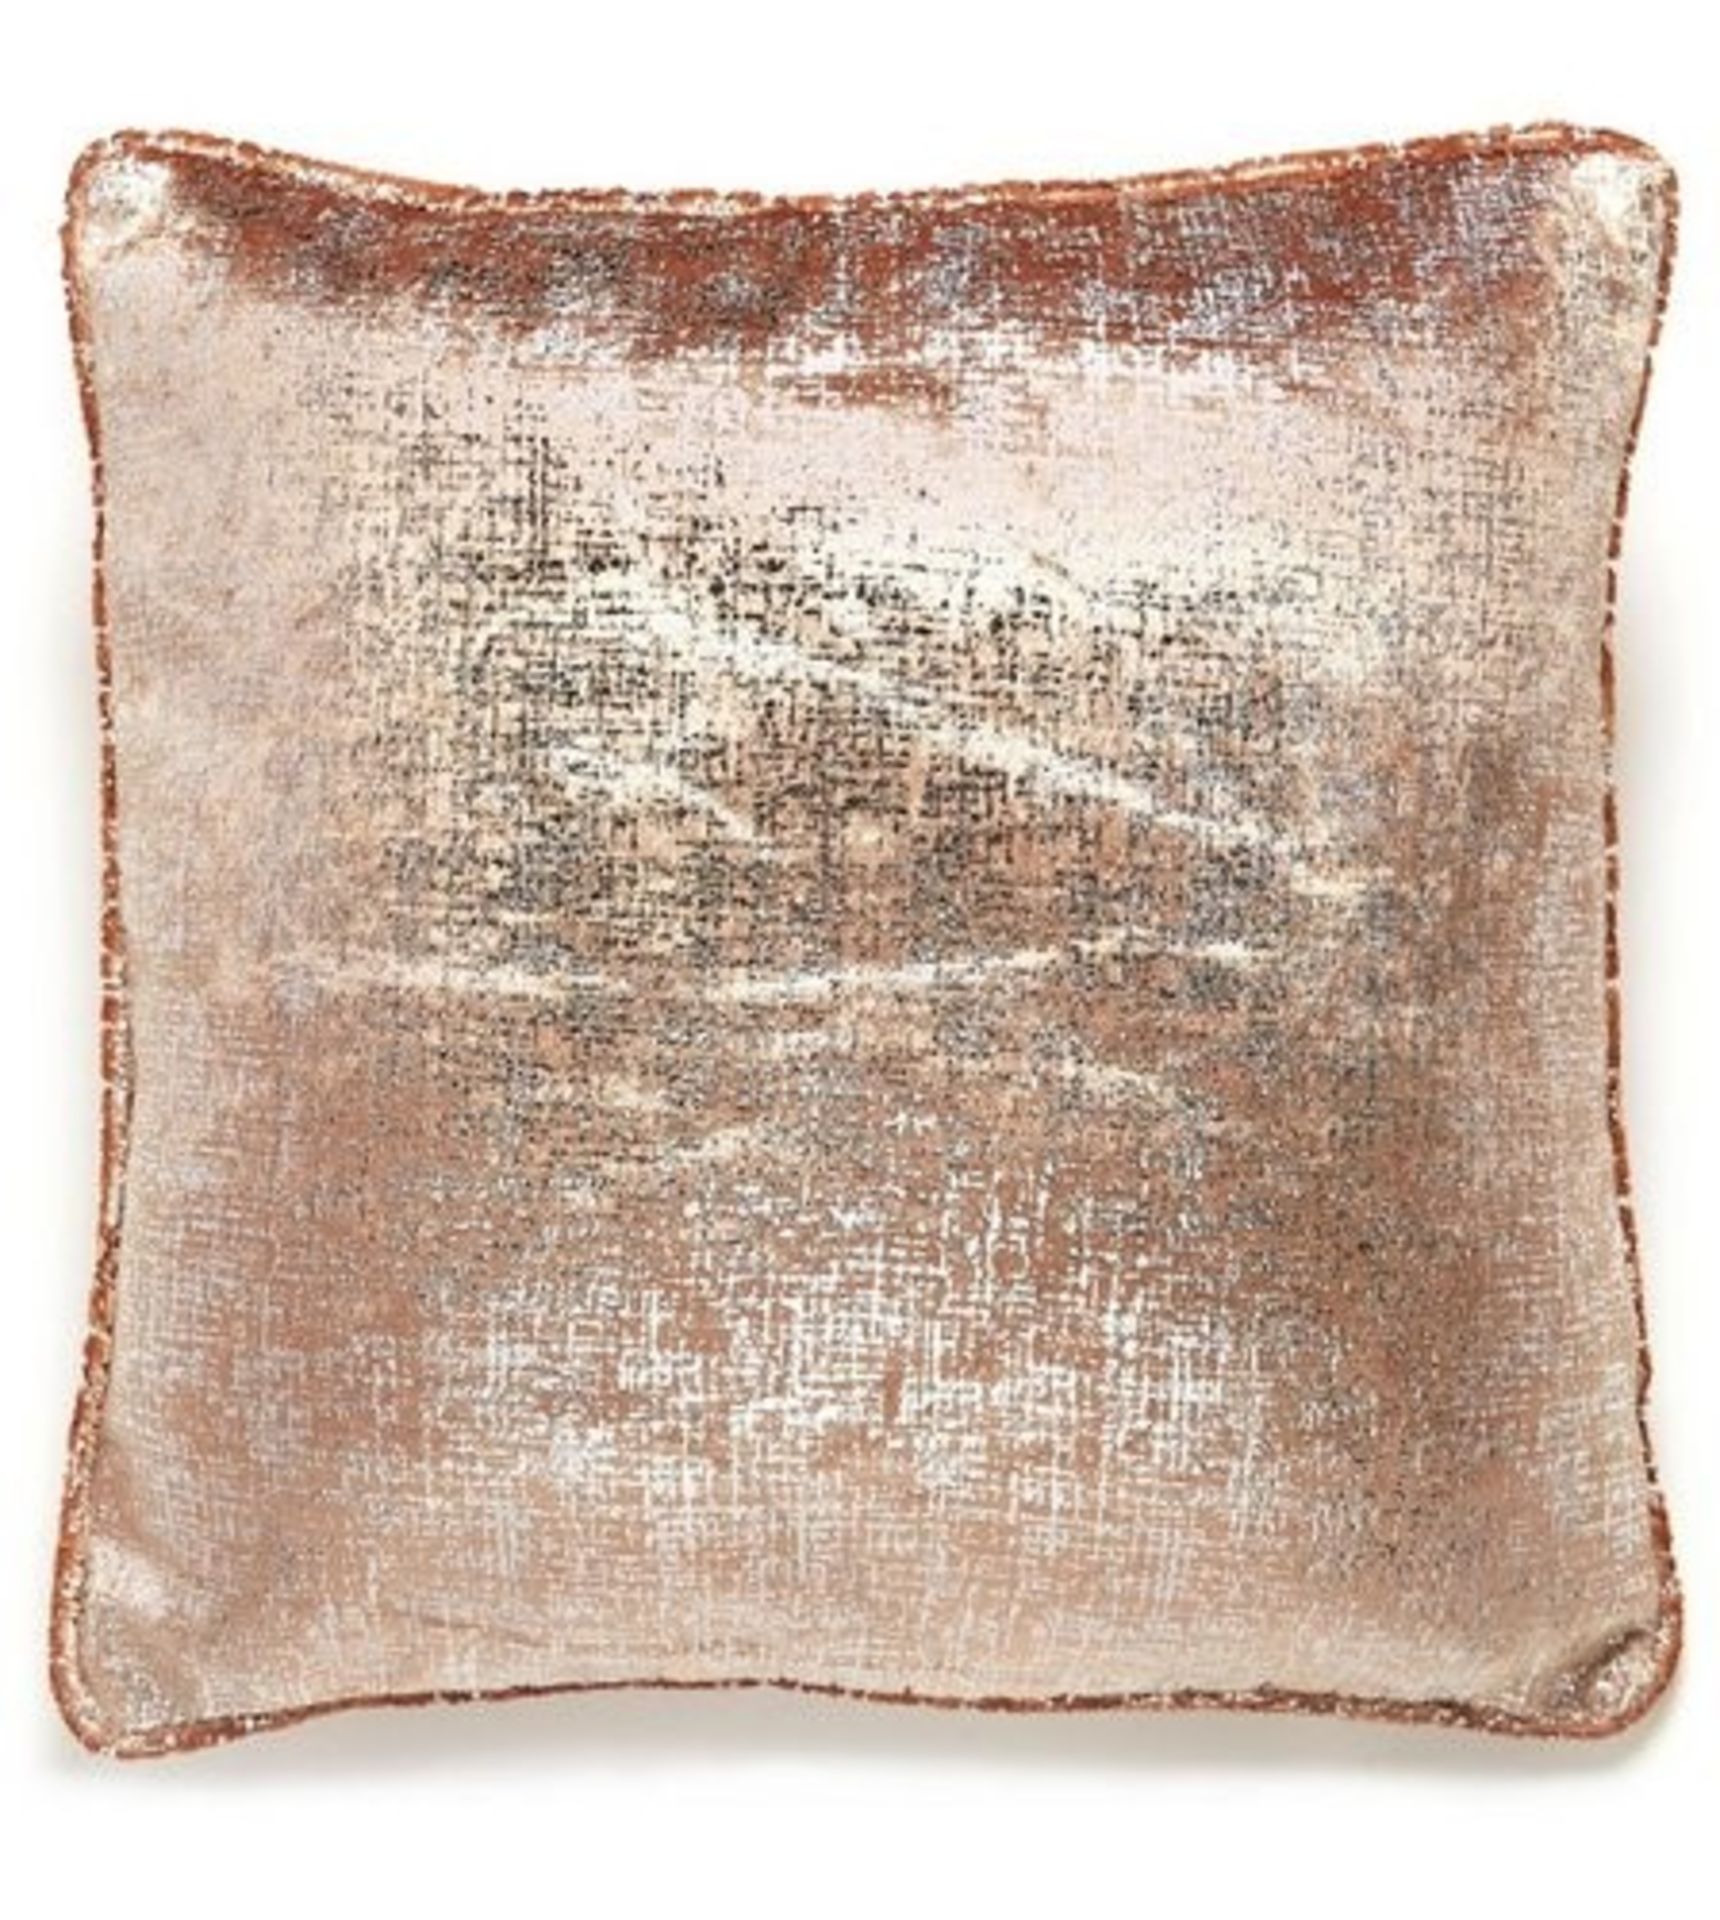 1 AS NEW BAGGED VENUS METALLIC VELVET CUSHION COVER IN BRONZE (VIEWING HIGHLY RECOMMENDED)